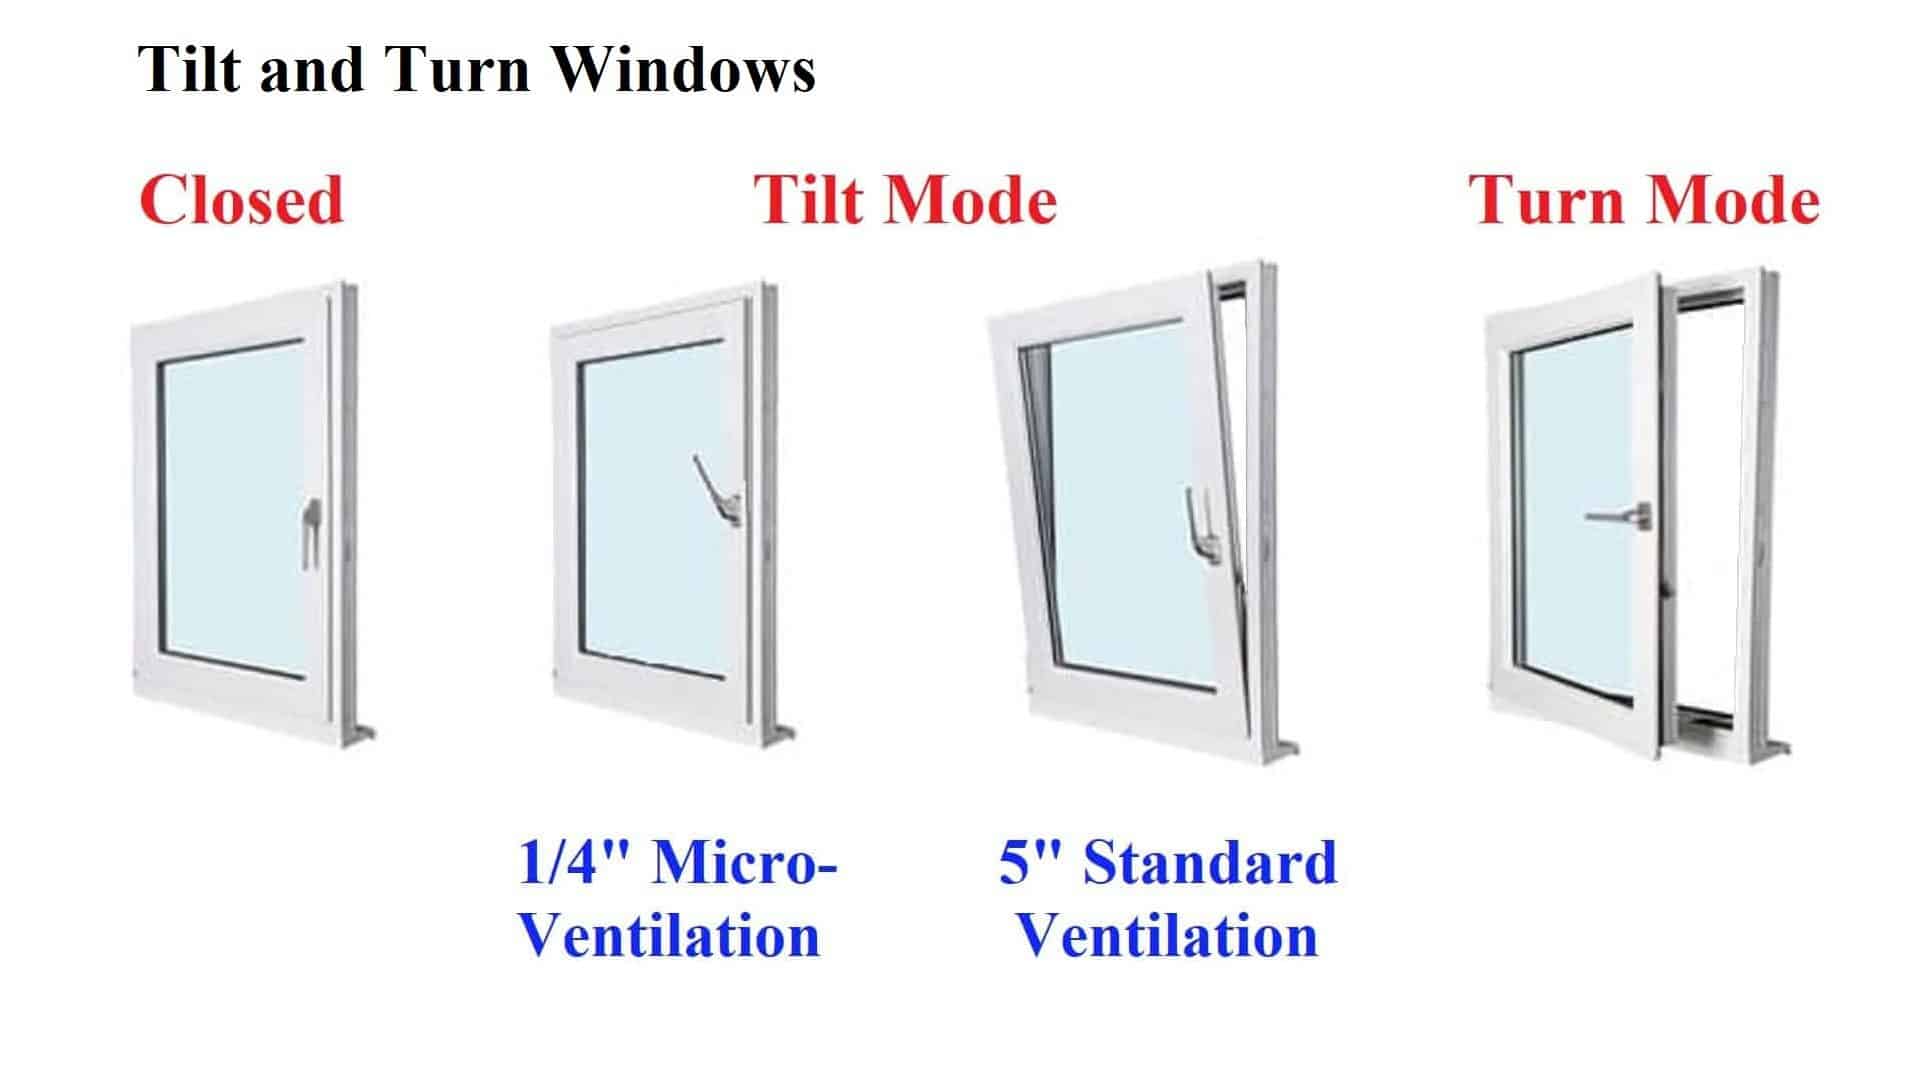 Tilt and Turn Windows' opening in four positions